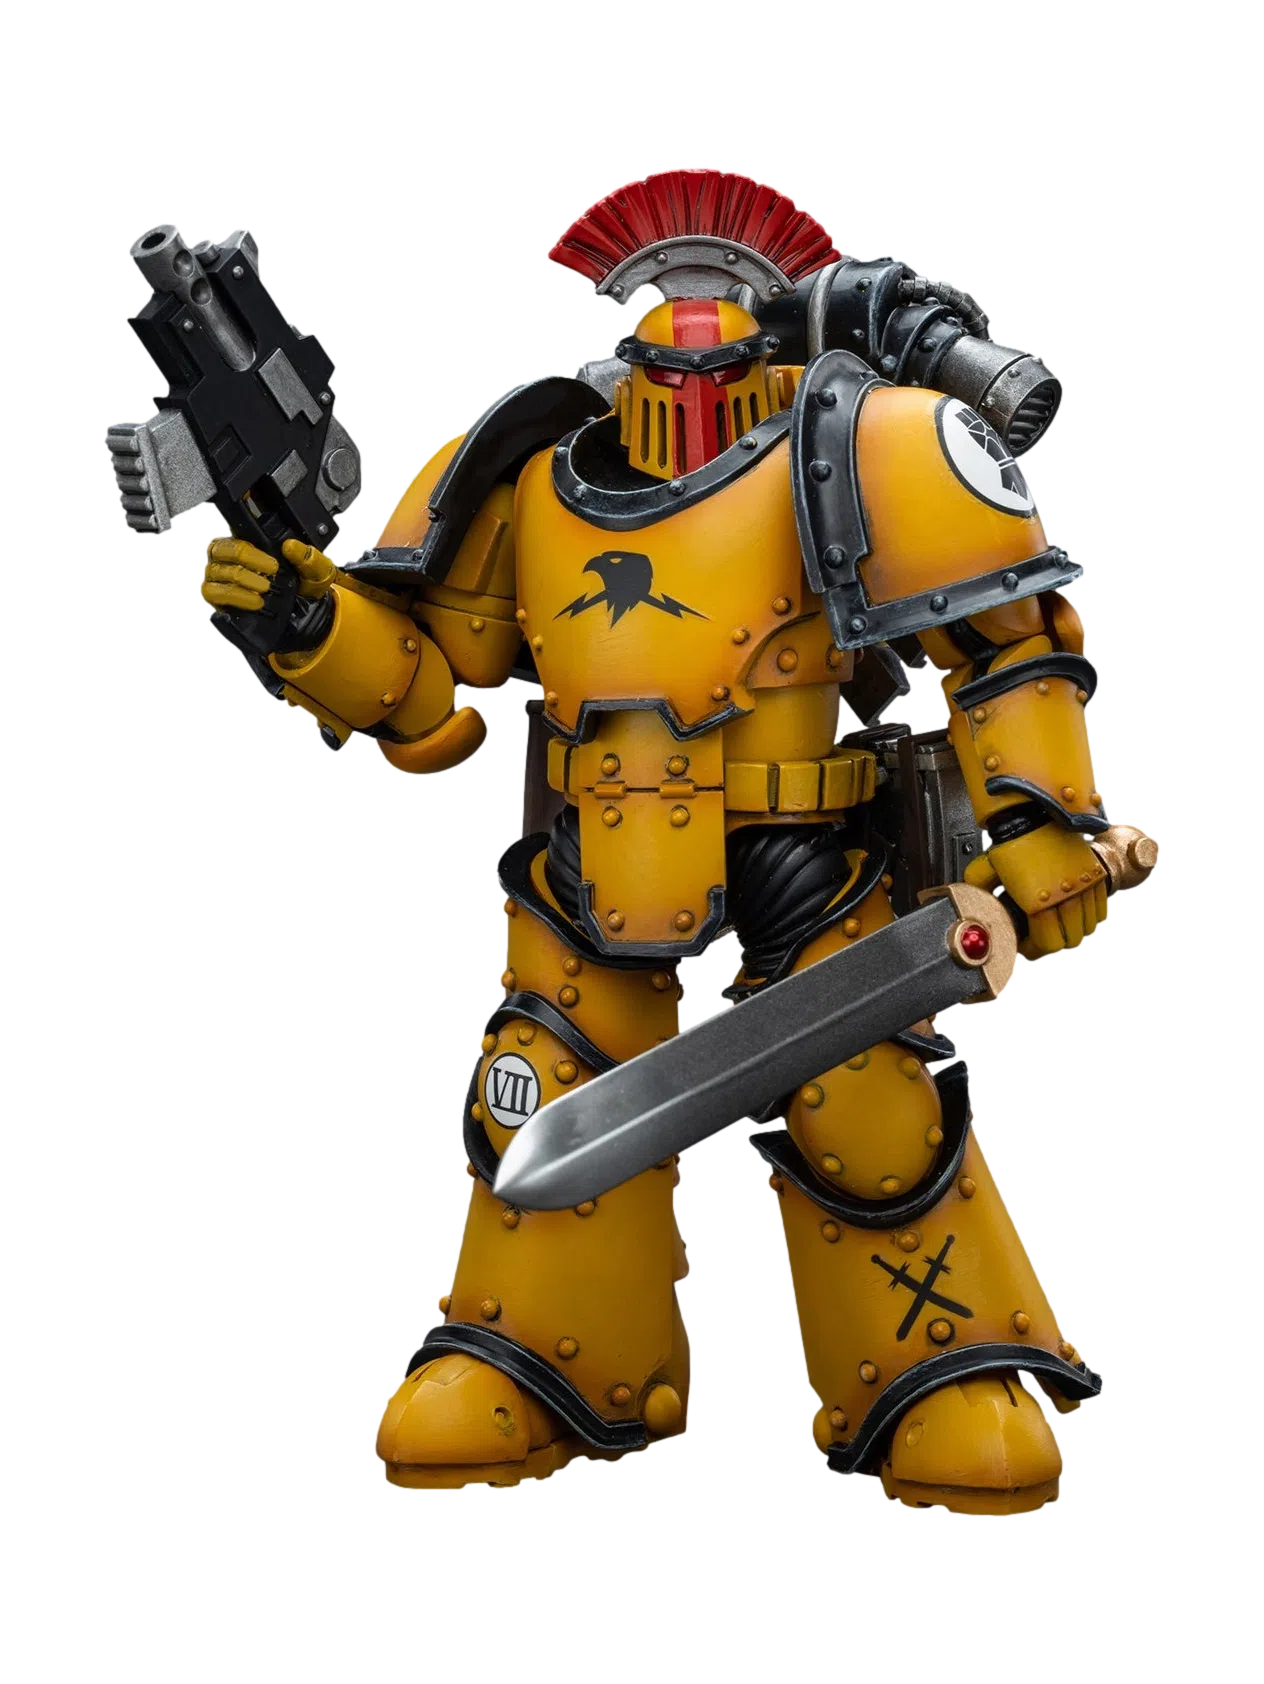 Warhammer: The Horus Hersey: Imperial Fists: Legion MkIII Tactical Squad Sergeant with Power Sword Action Figure Joy Toy